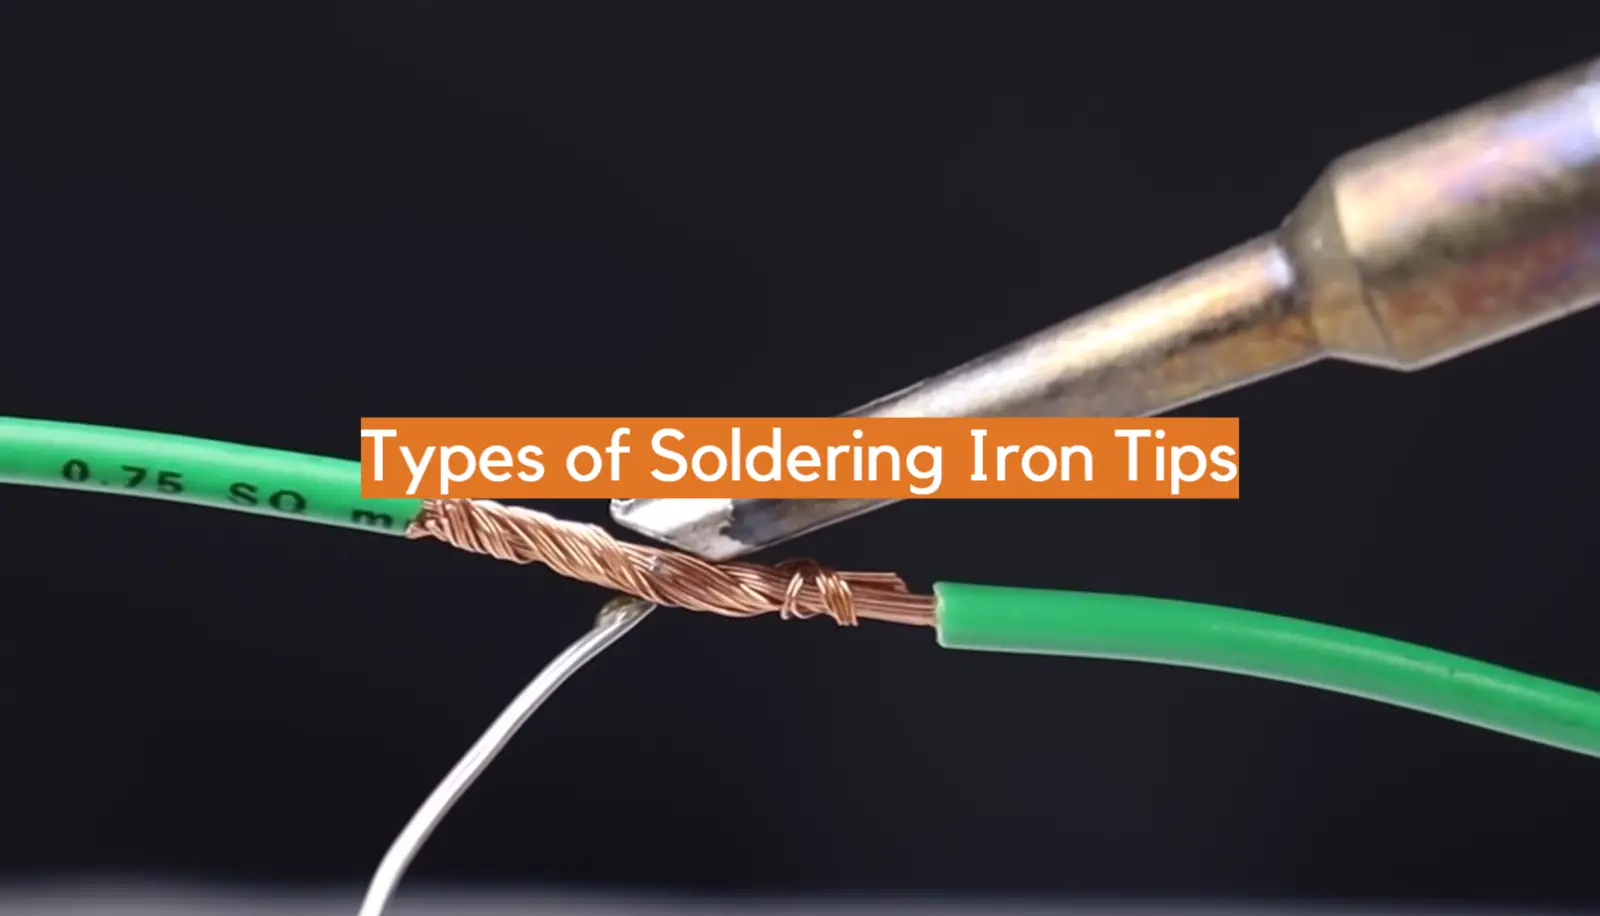 Types of Soldering Iron Tips